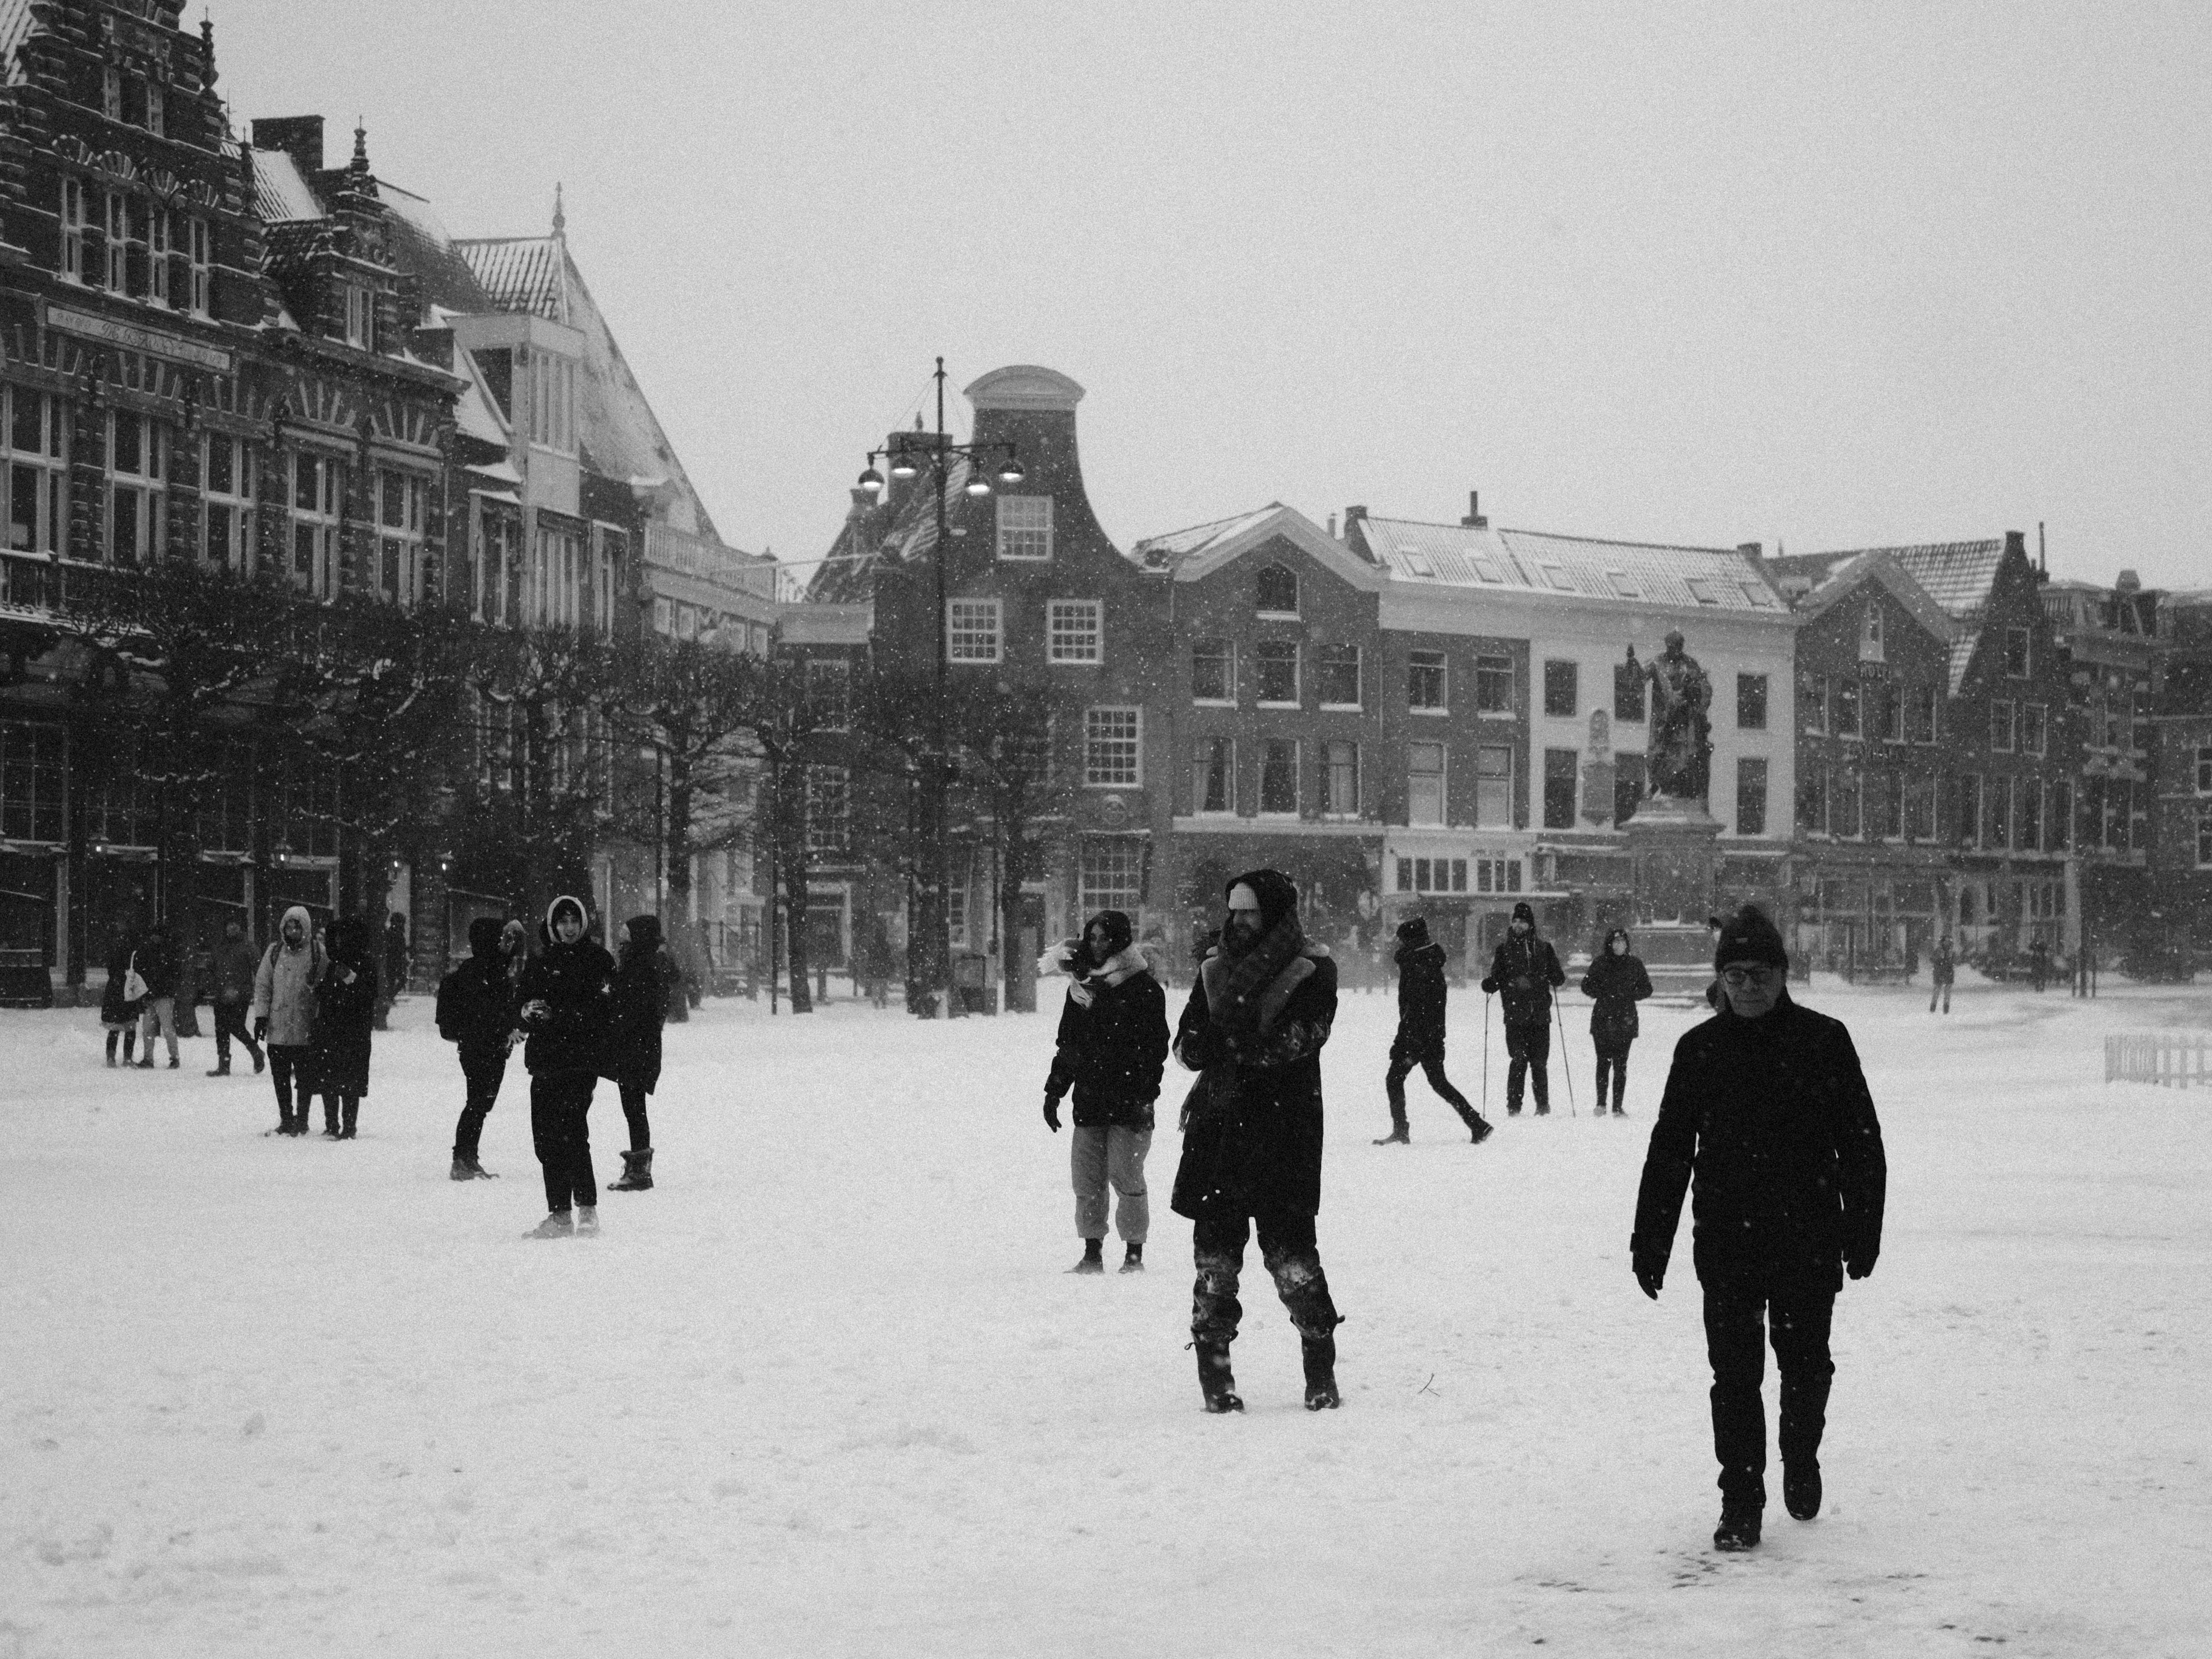 people walking on snow covered ground near building during daytime